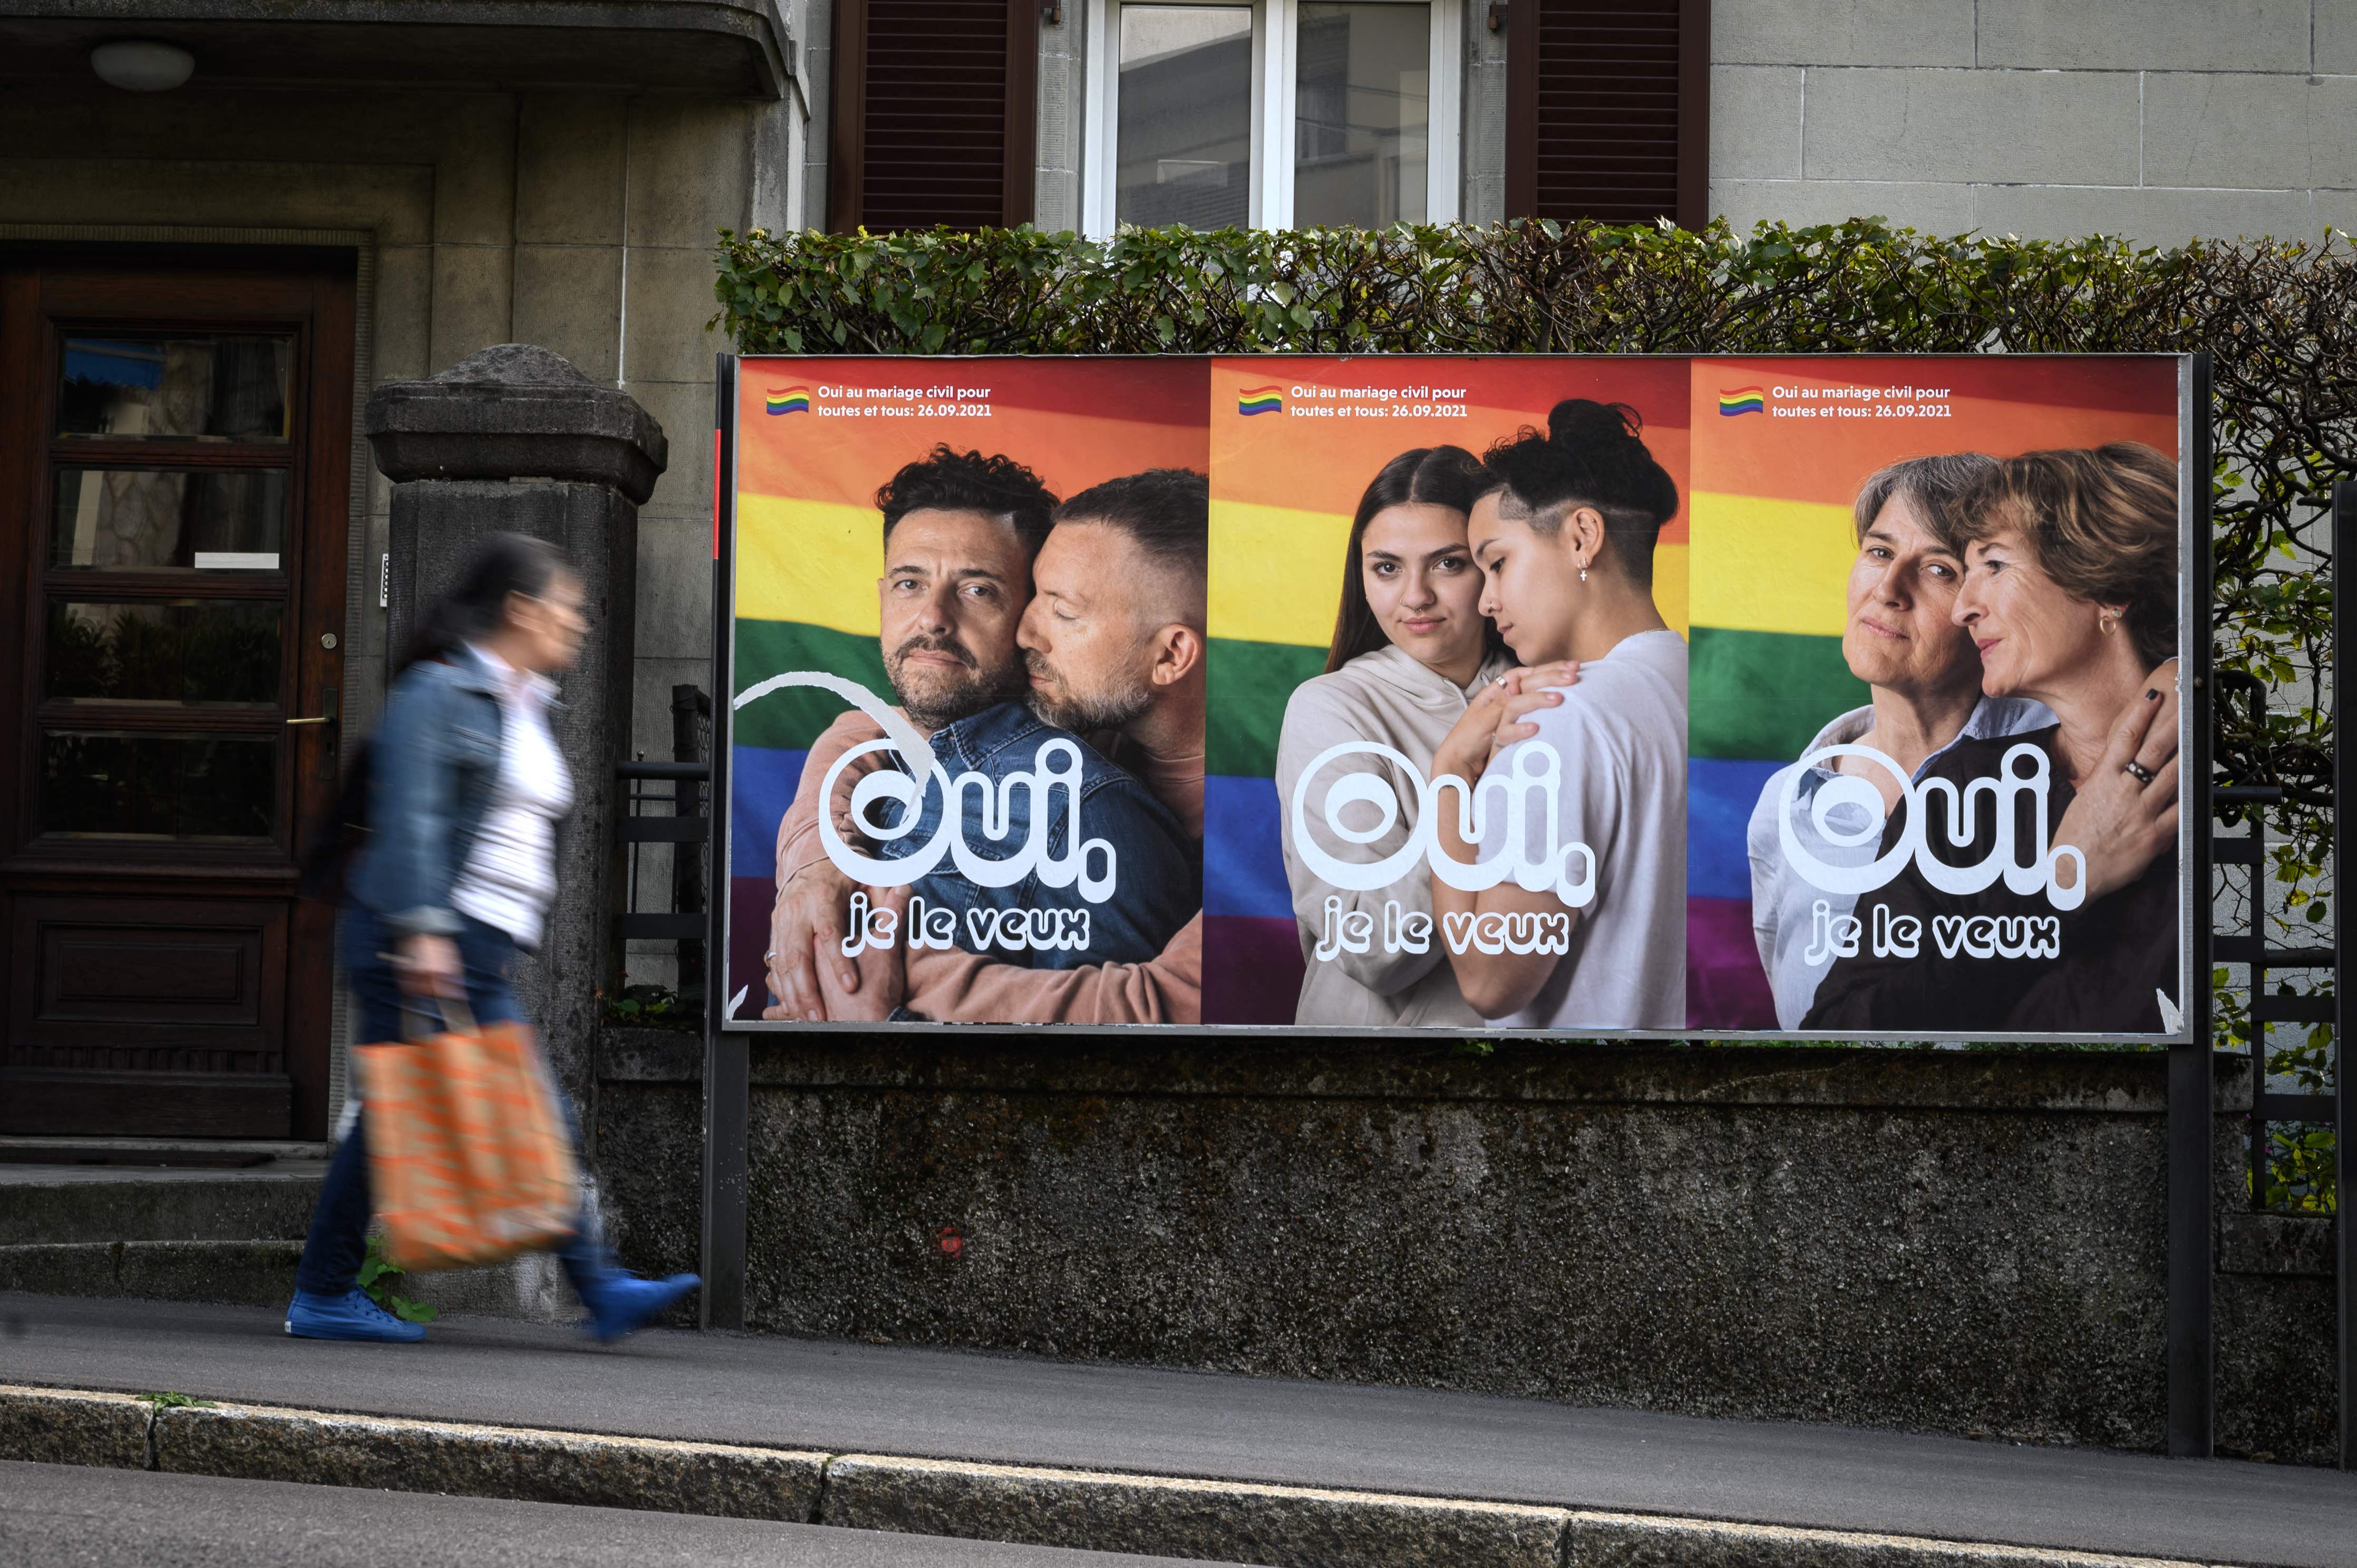 A woman walks past an electoral poster in the town of Lausanne, Switzerland ahead of a nationwide vote on same-sex marriage